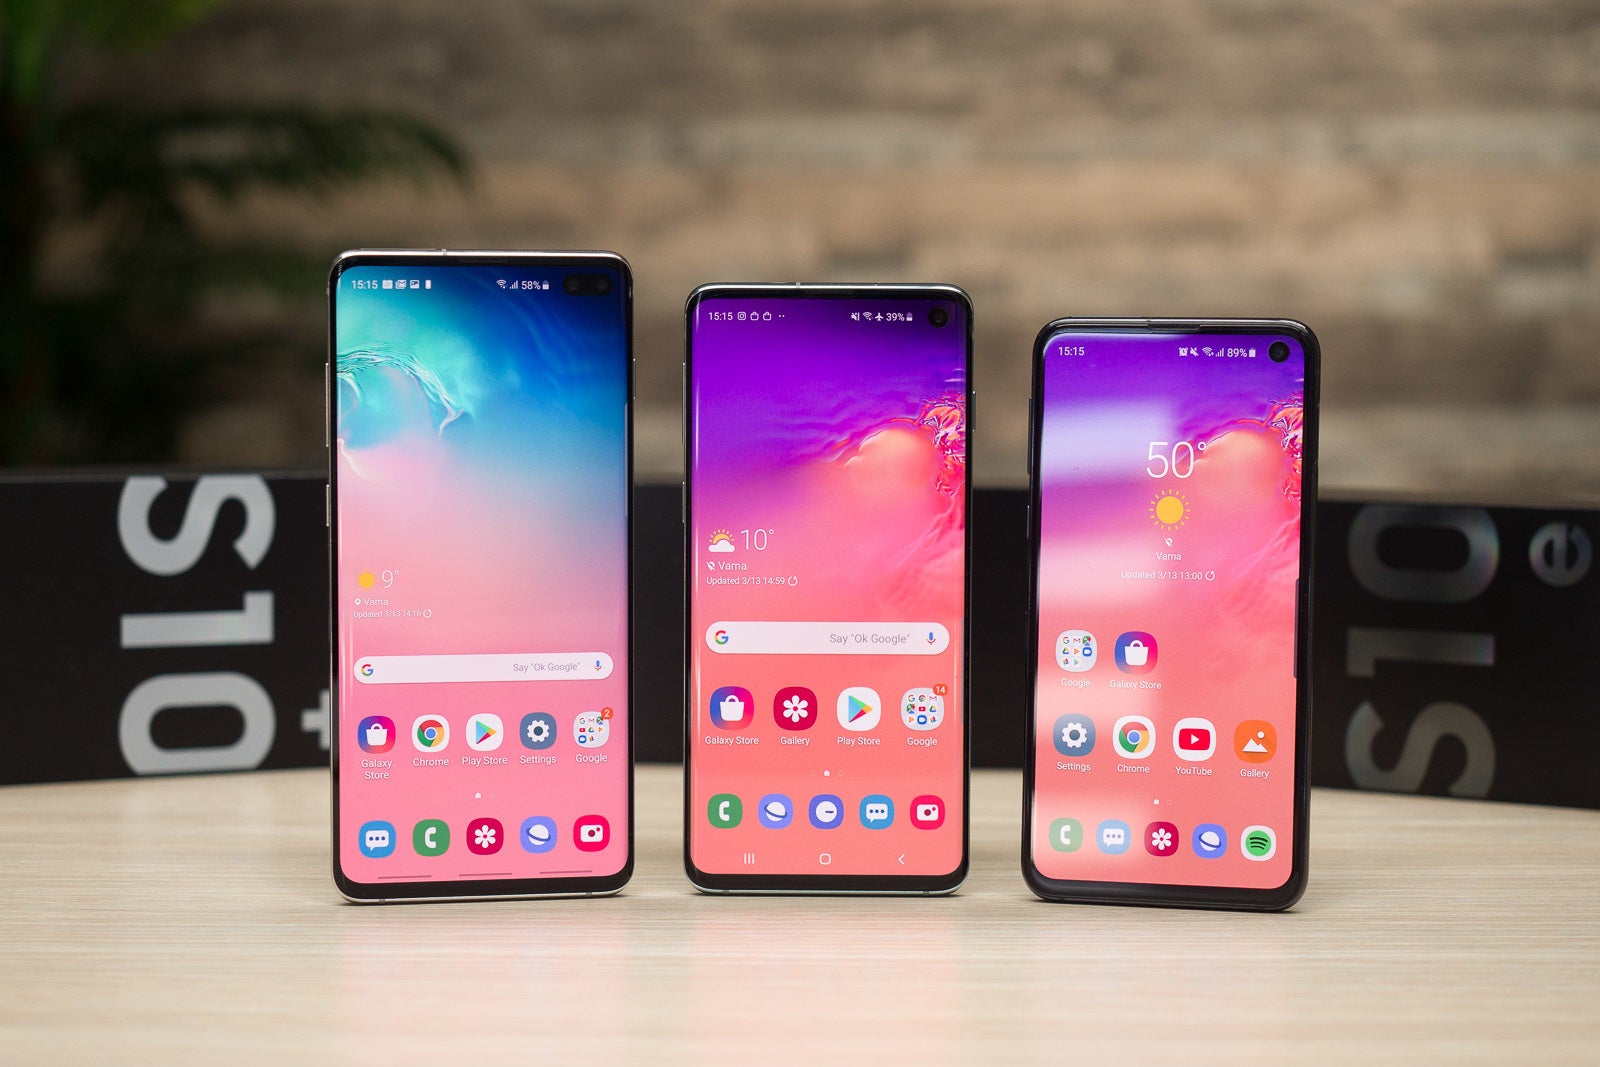 Most popular on the right and least popular on the left - Samsung's Galaxy S10 has outsold the Galaxy S9 by a significant margin